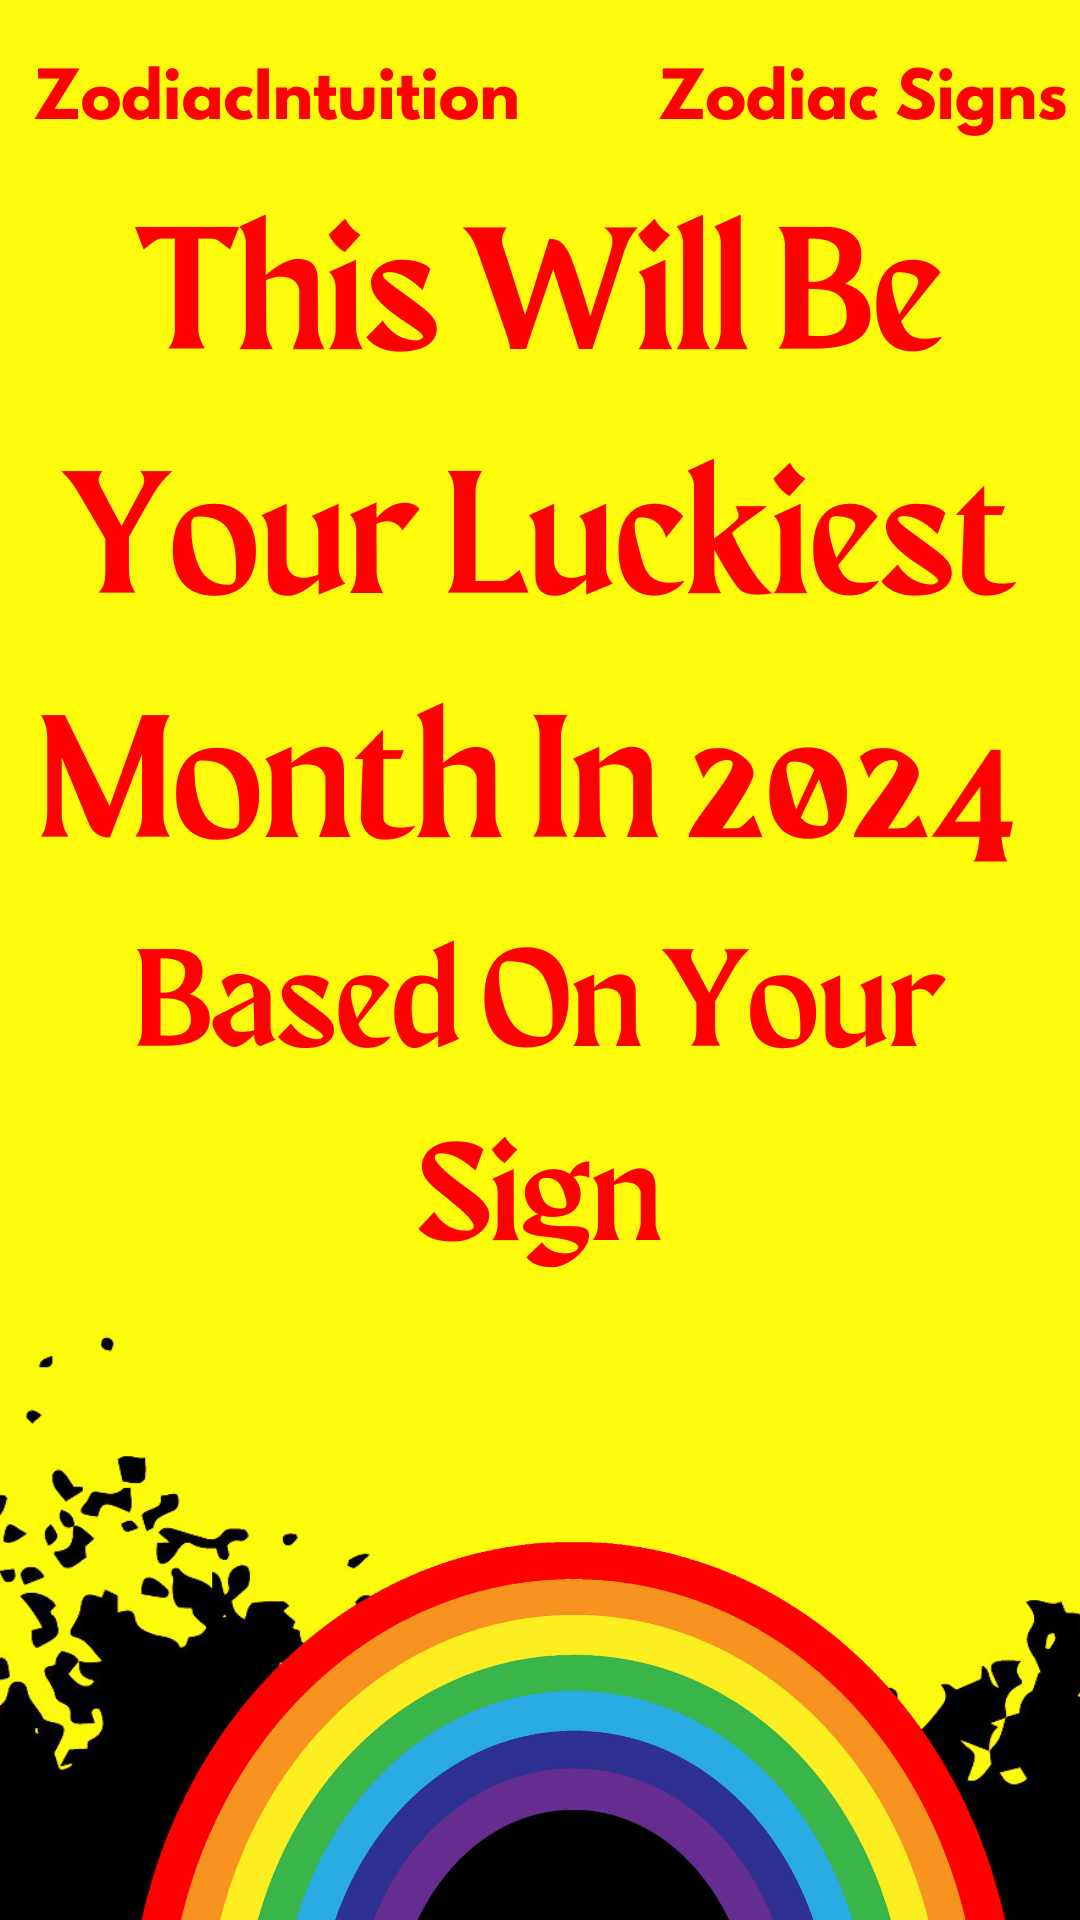 This Will Be Your Luckiest Month In 2024 Based On Your Sign